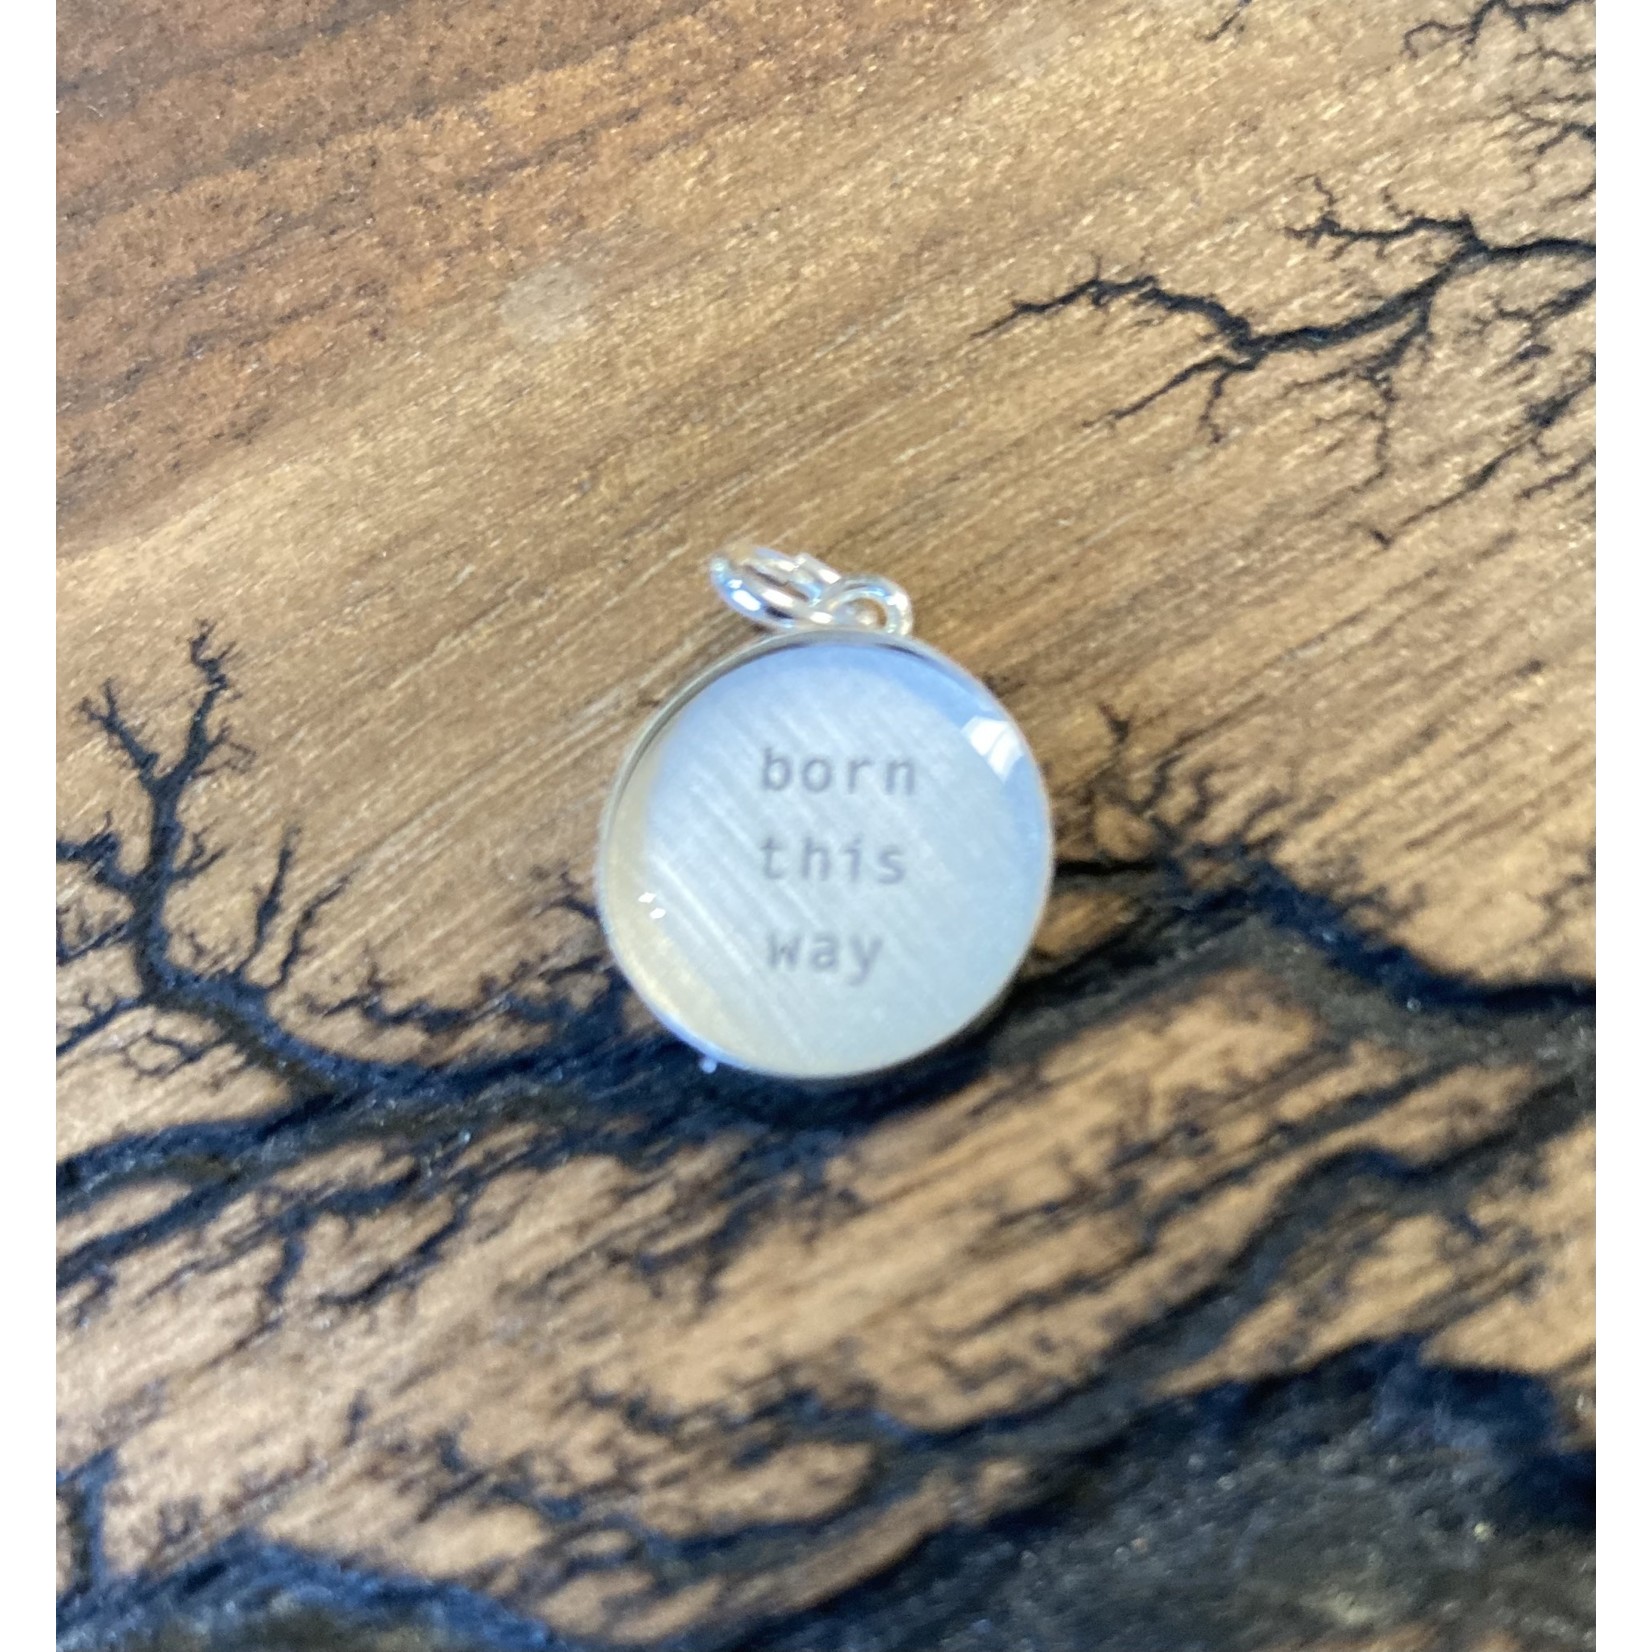 Everyday Artifacts Everyday Artifacts | born this way 12mm ss pendant